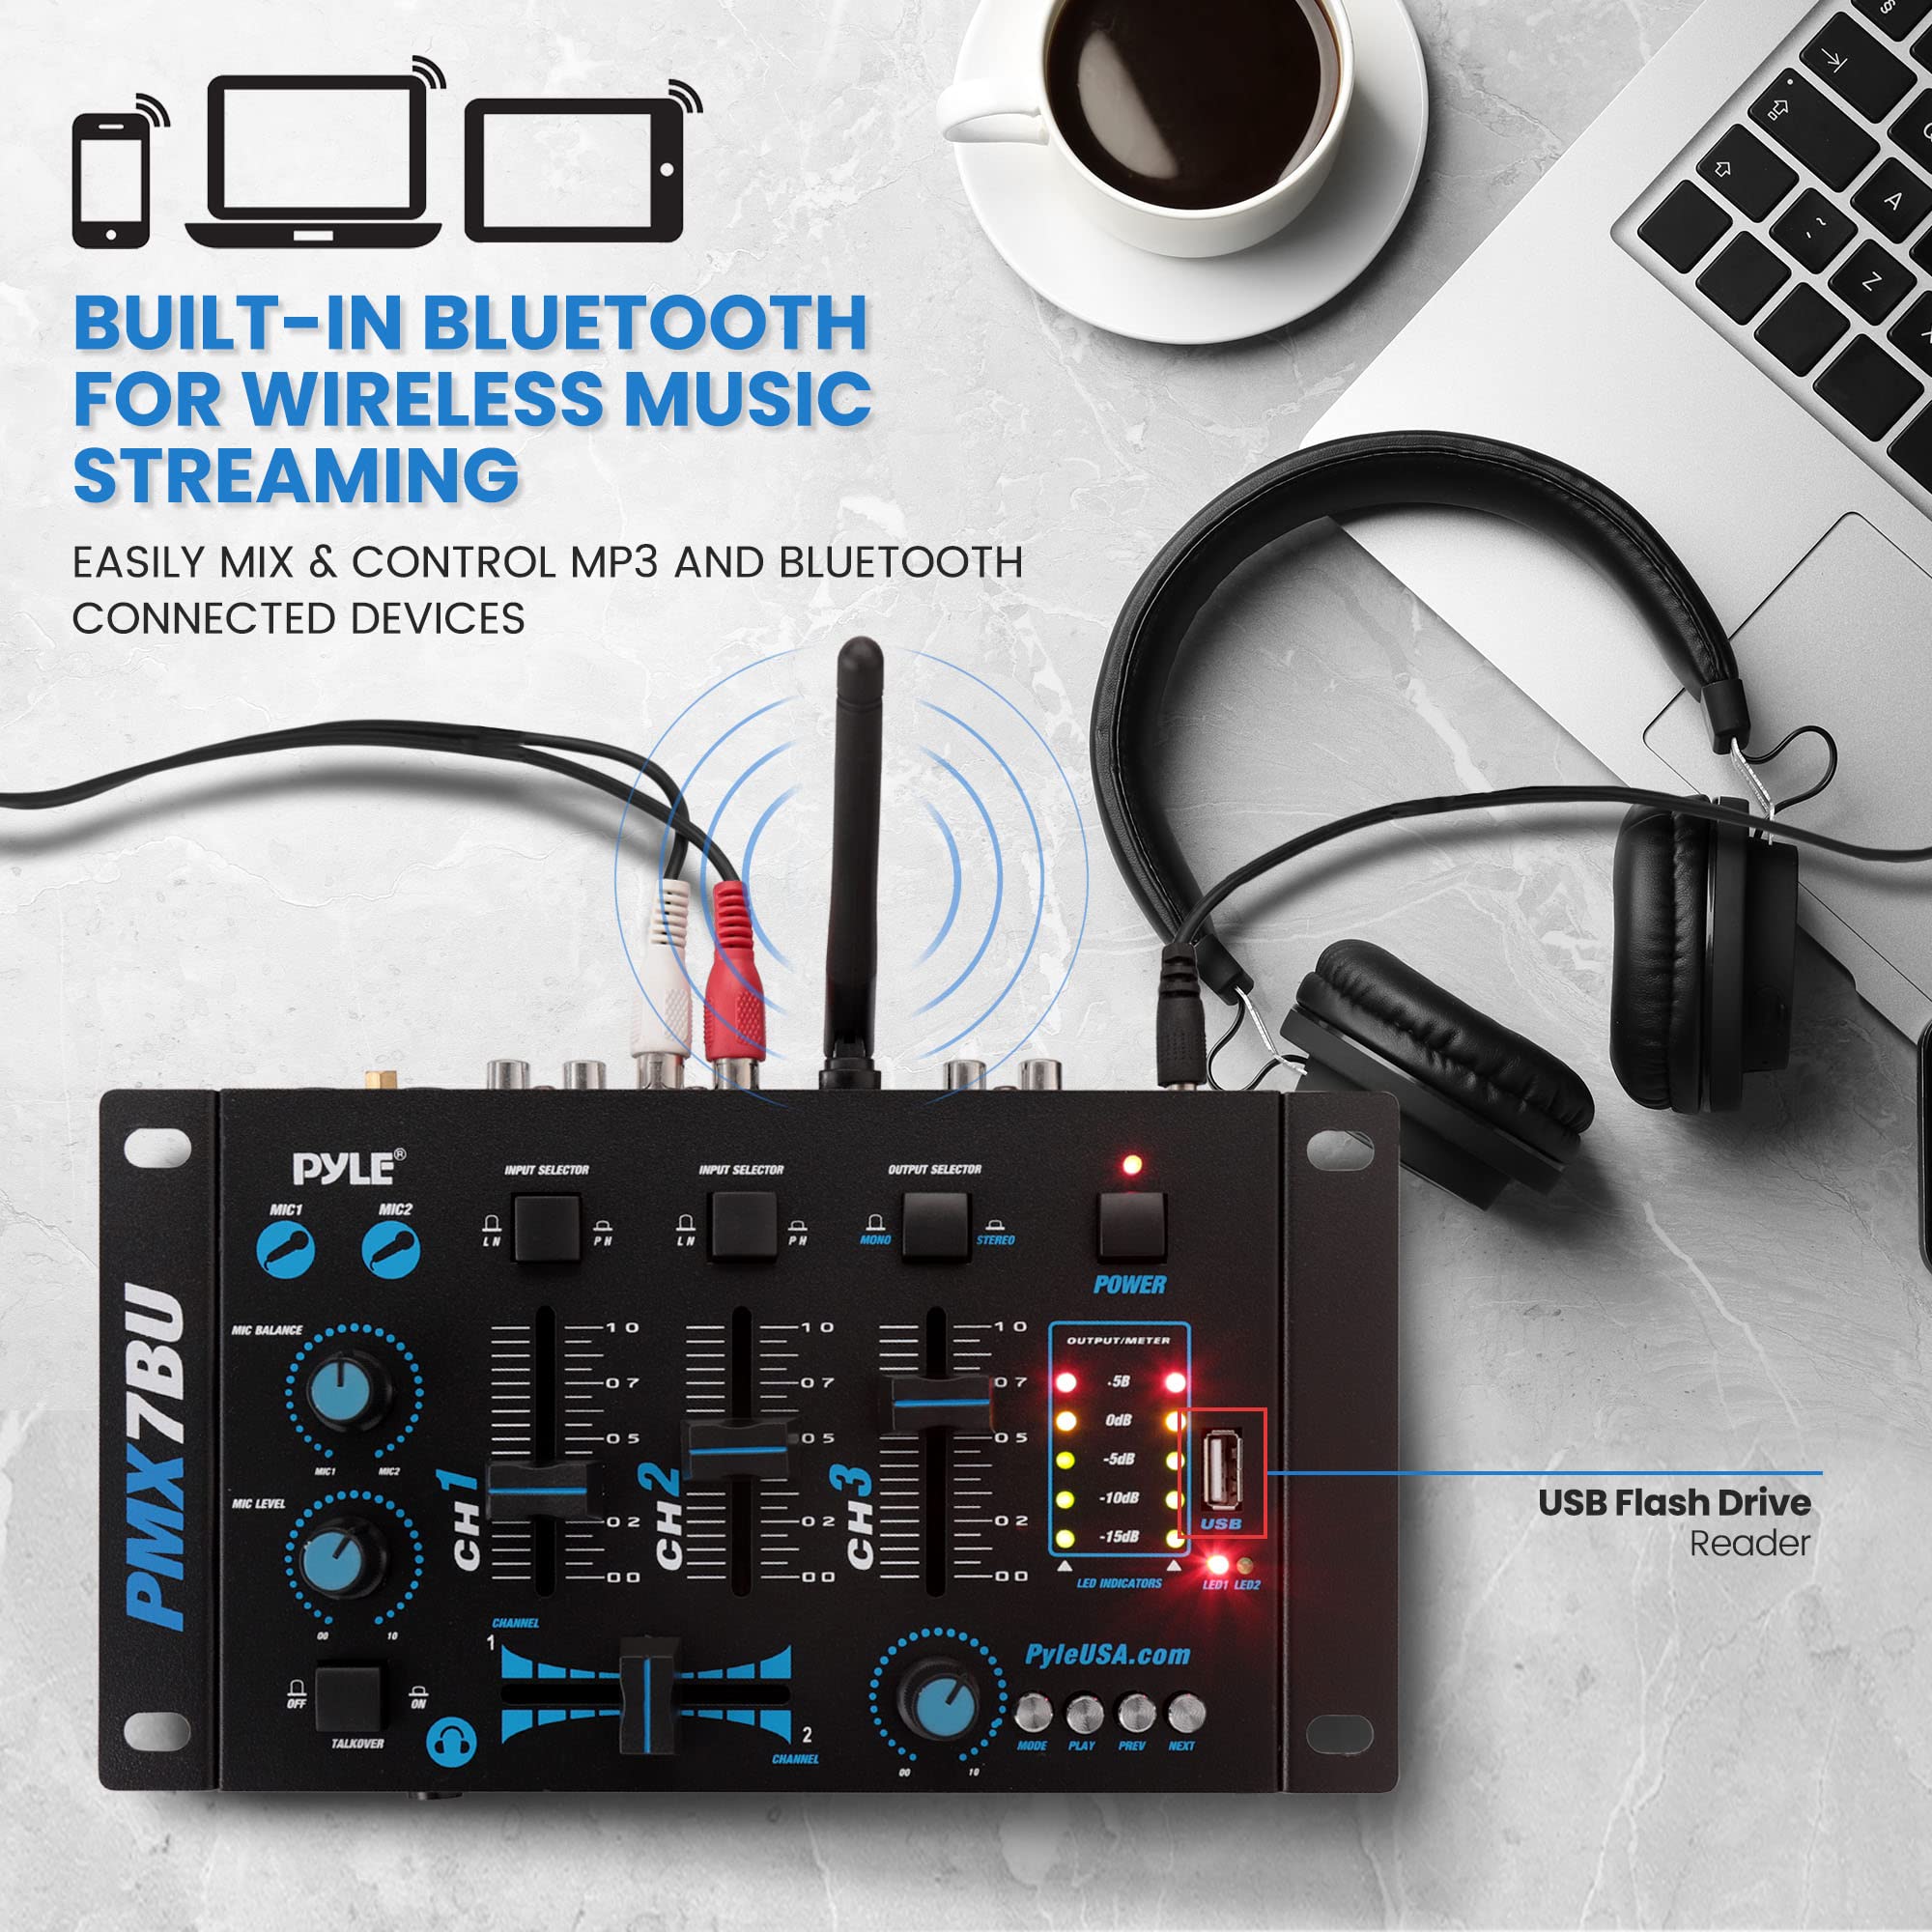 Pyle, 3 Wireless Audio Machine-3 Channel Bluetooth Compatible DJ Controller Sound Mixer System with Mic-Talkover, USB Reader, Dual RCA Phono/Line in, Microphone Input, Headphone Jack PMX7BU,Black